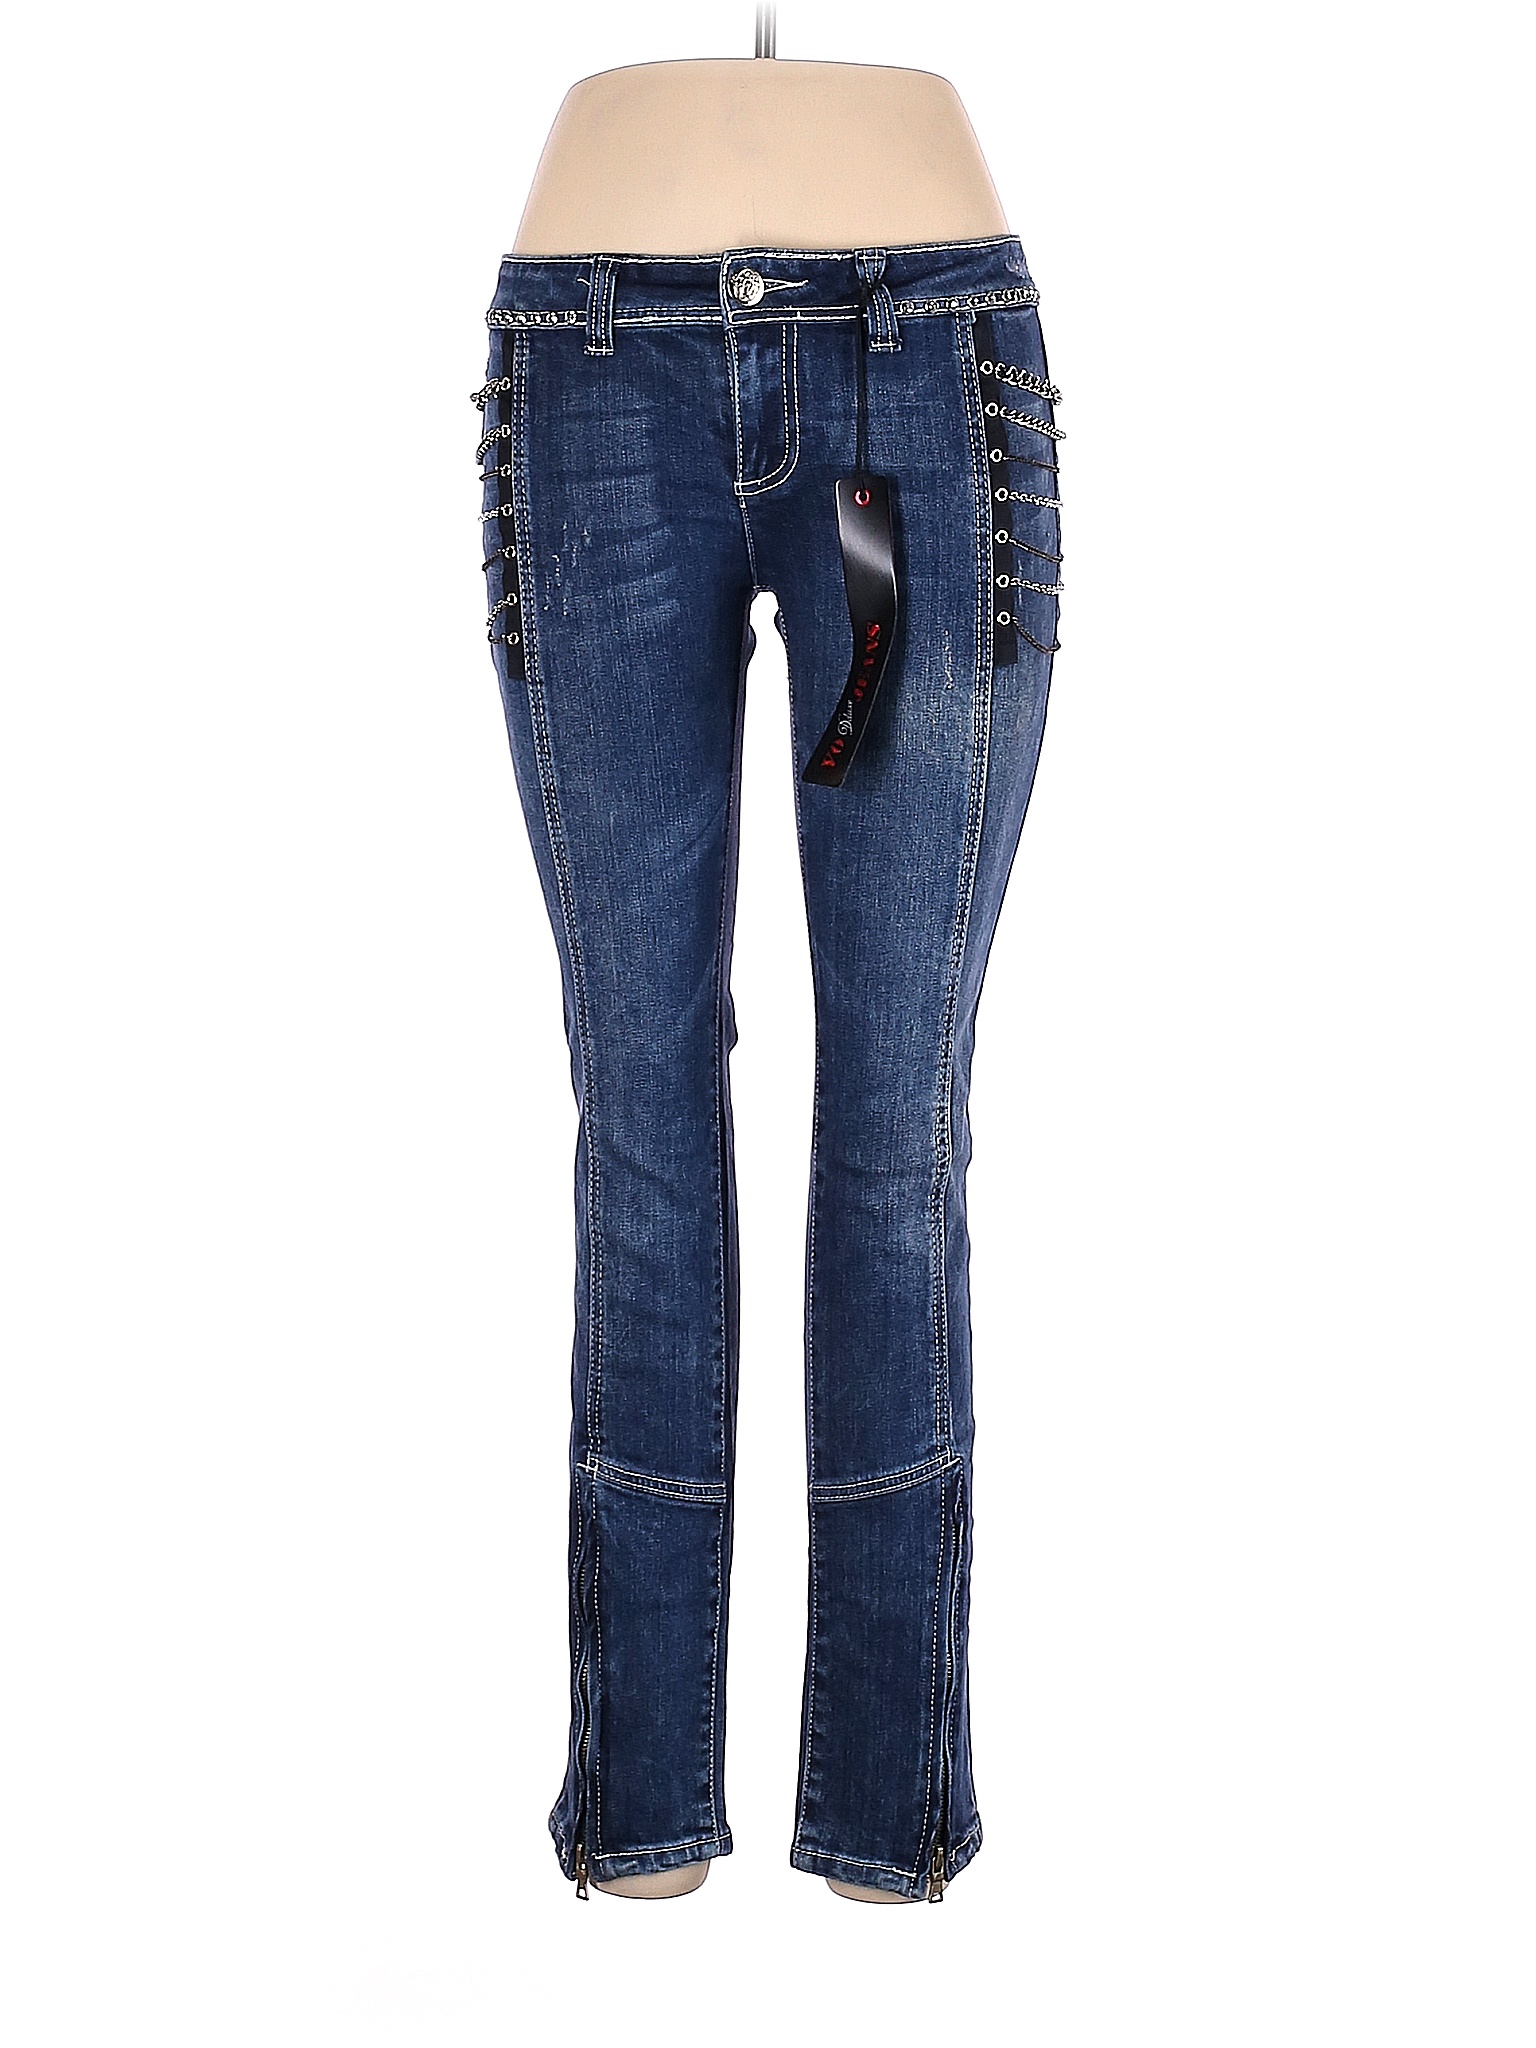 atomic Cater Fruit vegetables vo jeans Women's Clothing On Sale Up To 90% Off Retail | thredUP